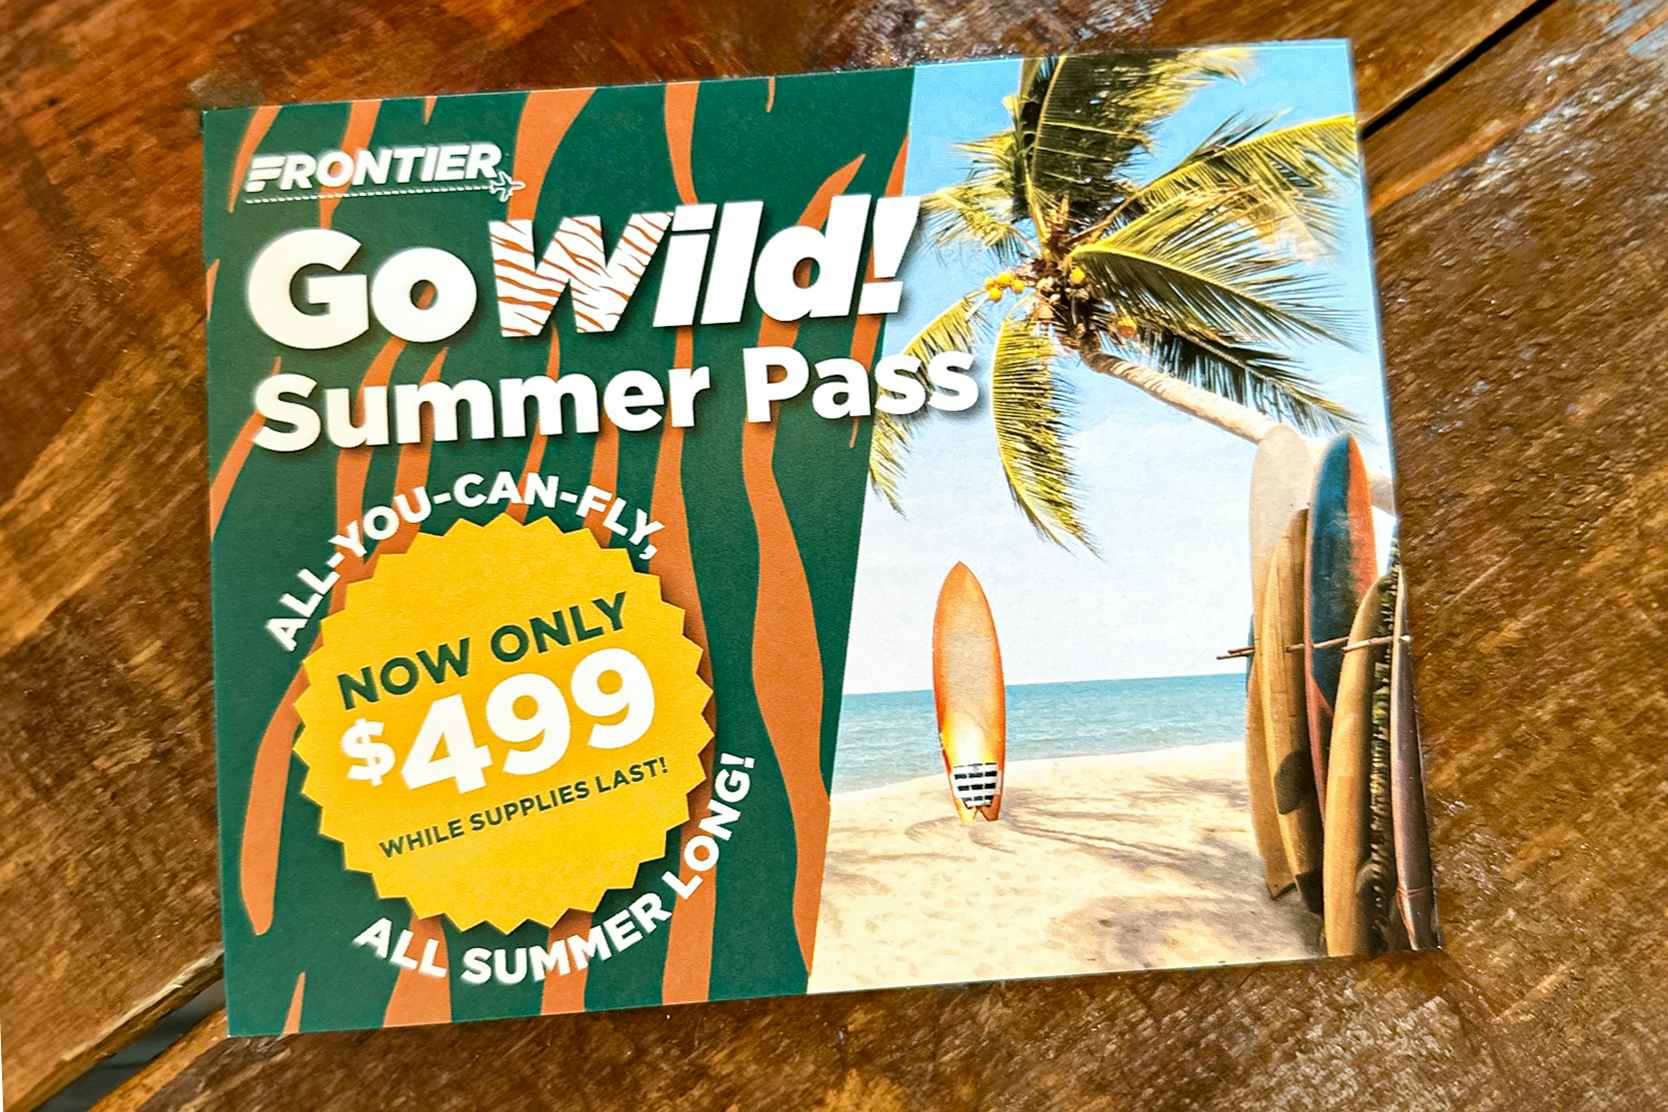 a flyer for the Frontier Airlines Go Wild summer pass